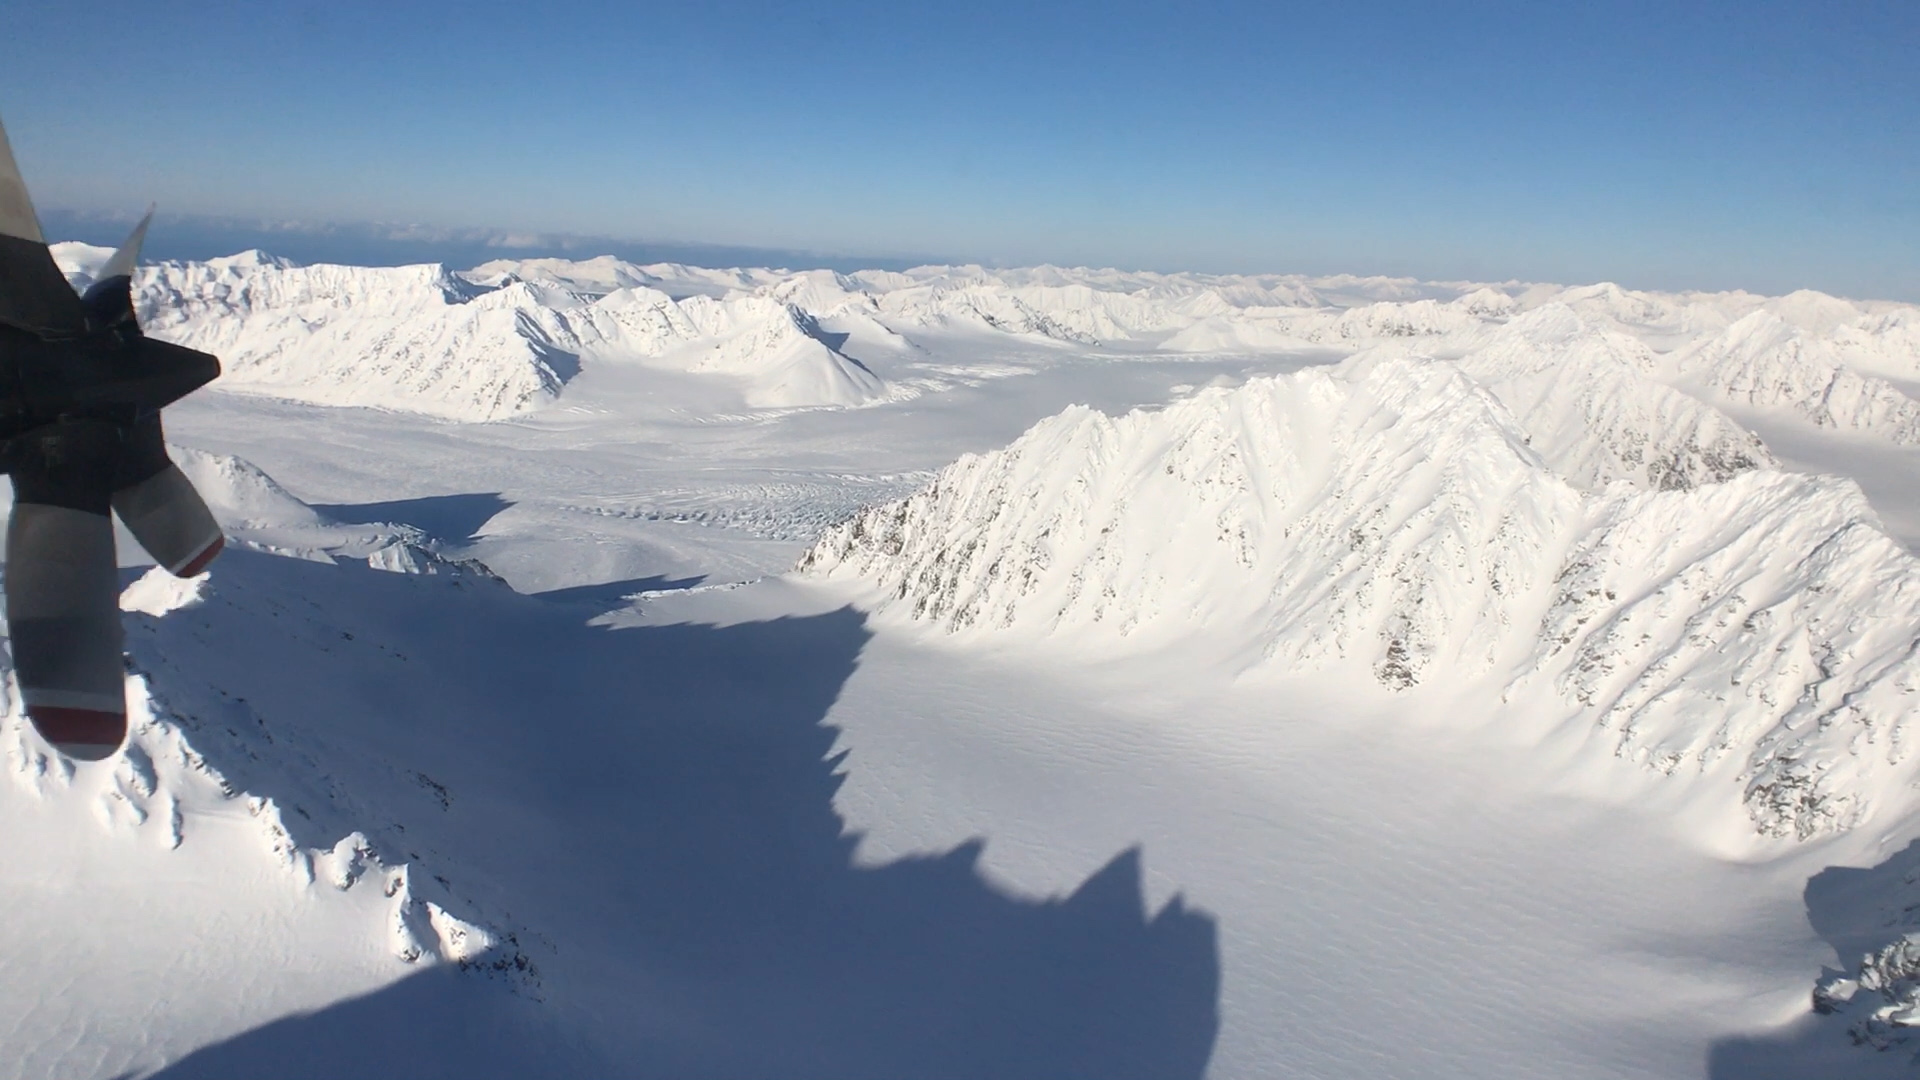 Svalbard landscape filmed from the P3-Orion aircraft during the 2017 Arctic campaign. NOTE: The audio on this clip varies widely and includes loud aircraft noise. We advise turning down/off sound when previewing this item.